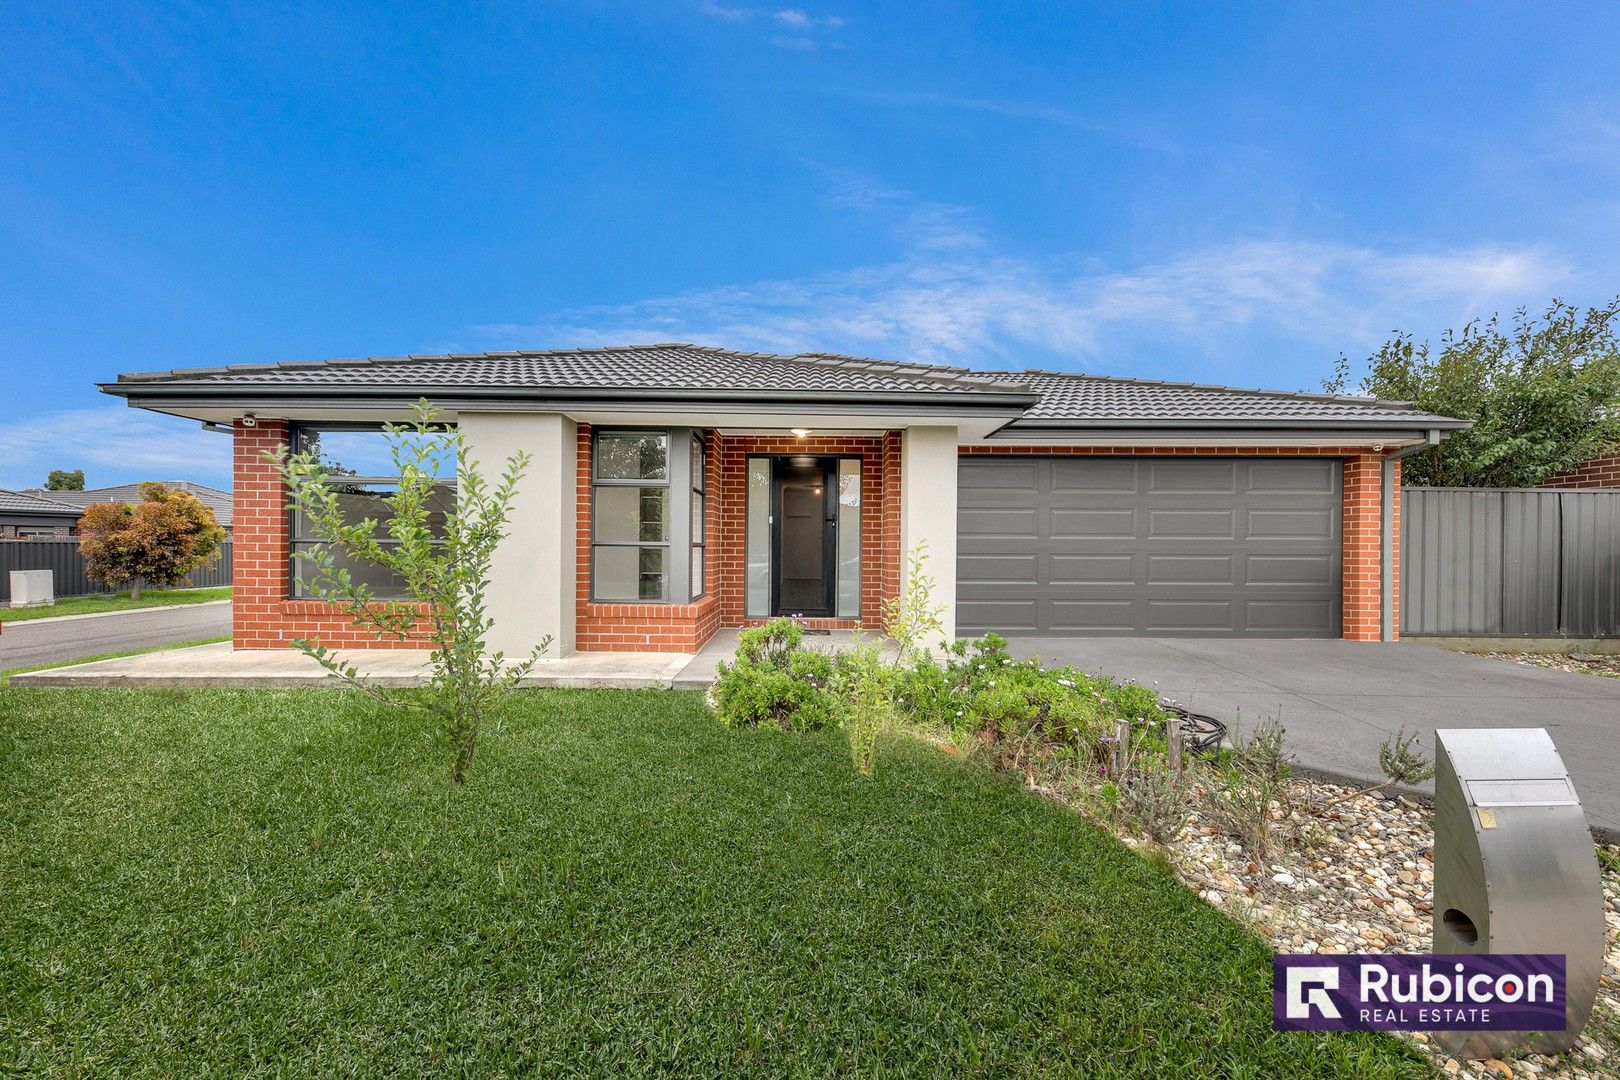 4 bedrooms House in 20 Miniata Way MANOR LAKES VIC, 3024